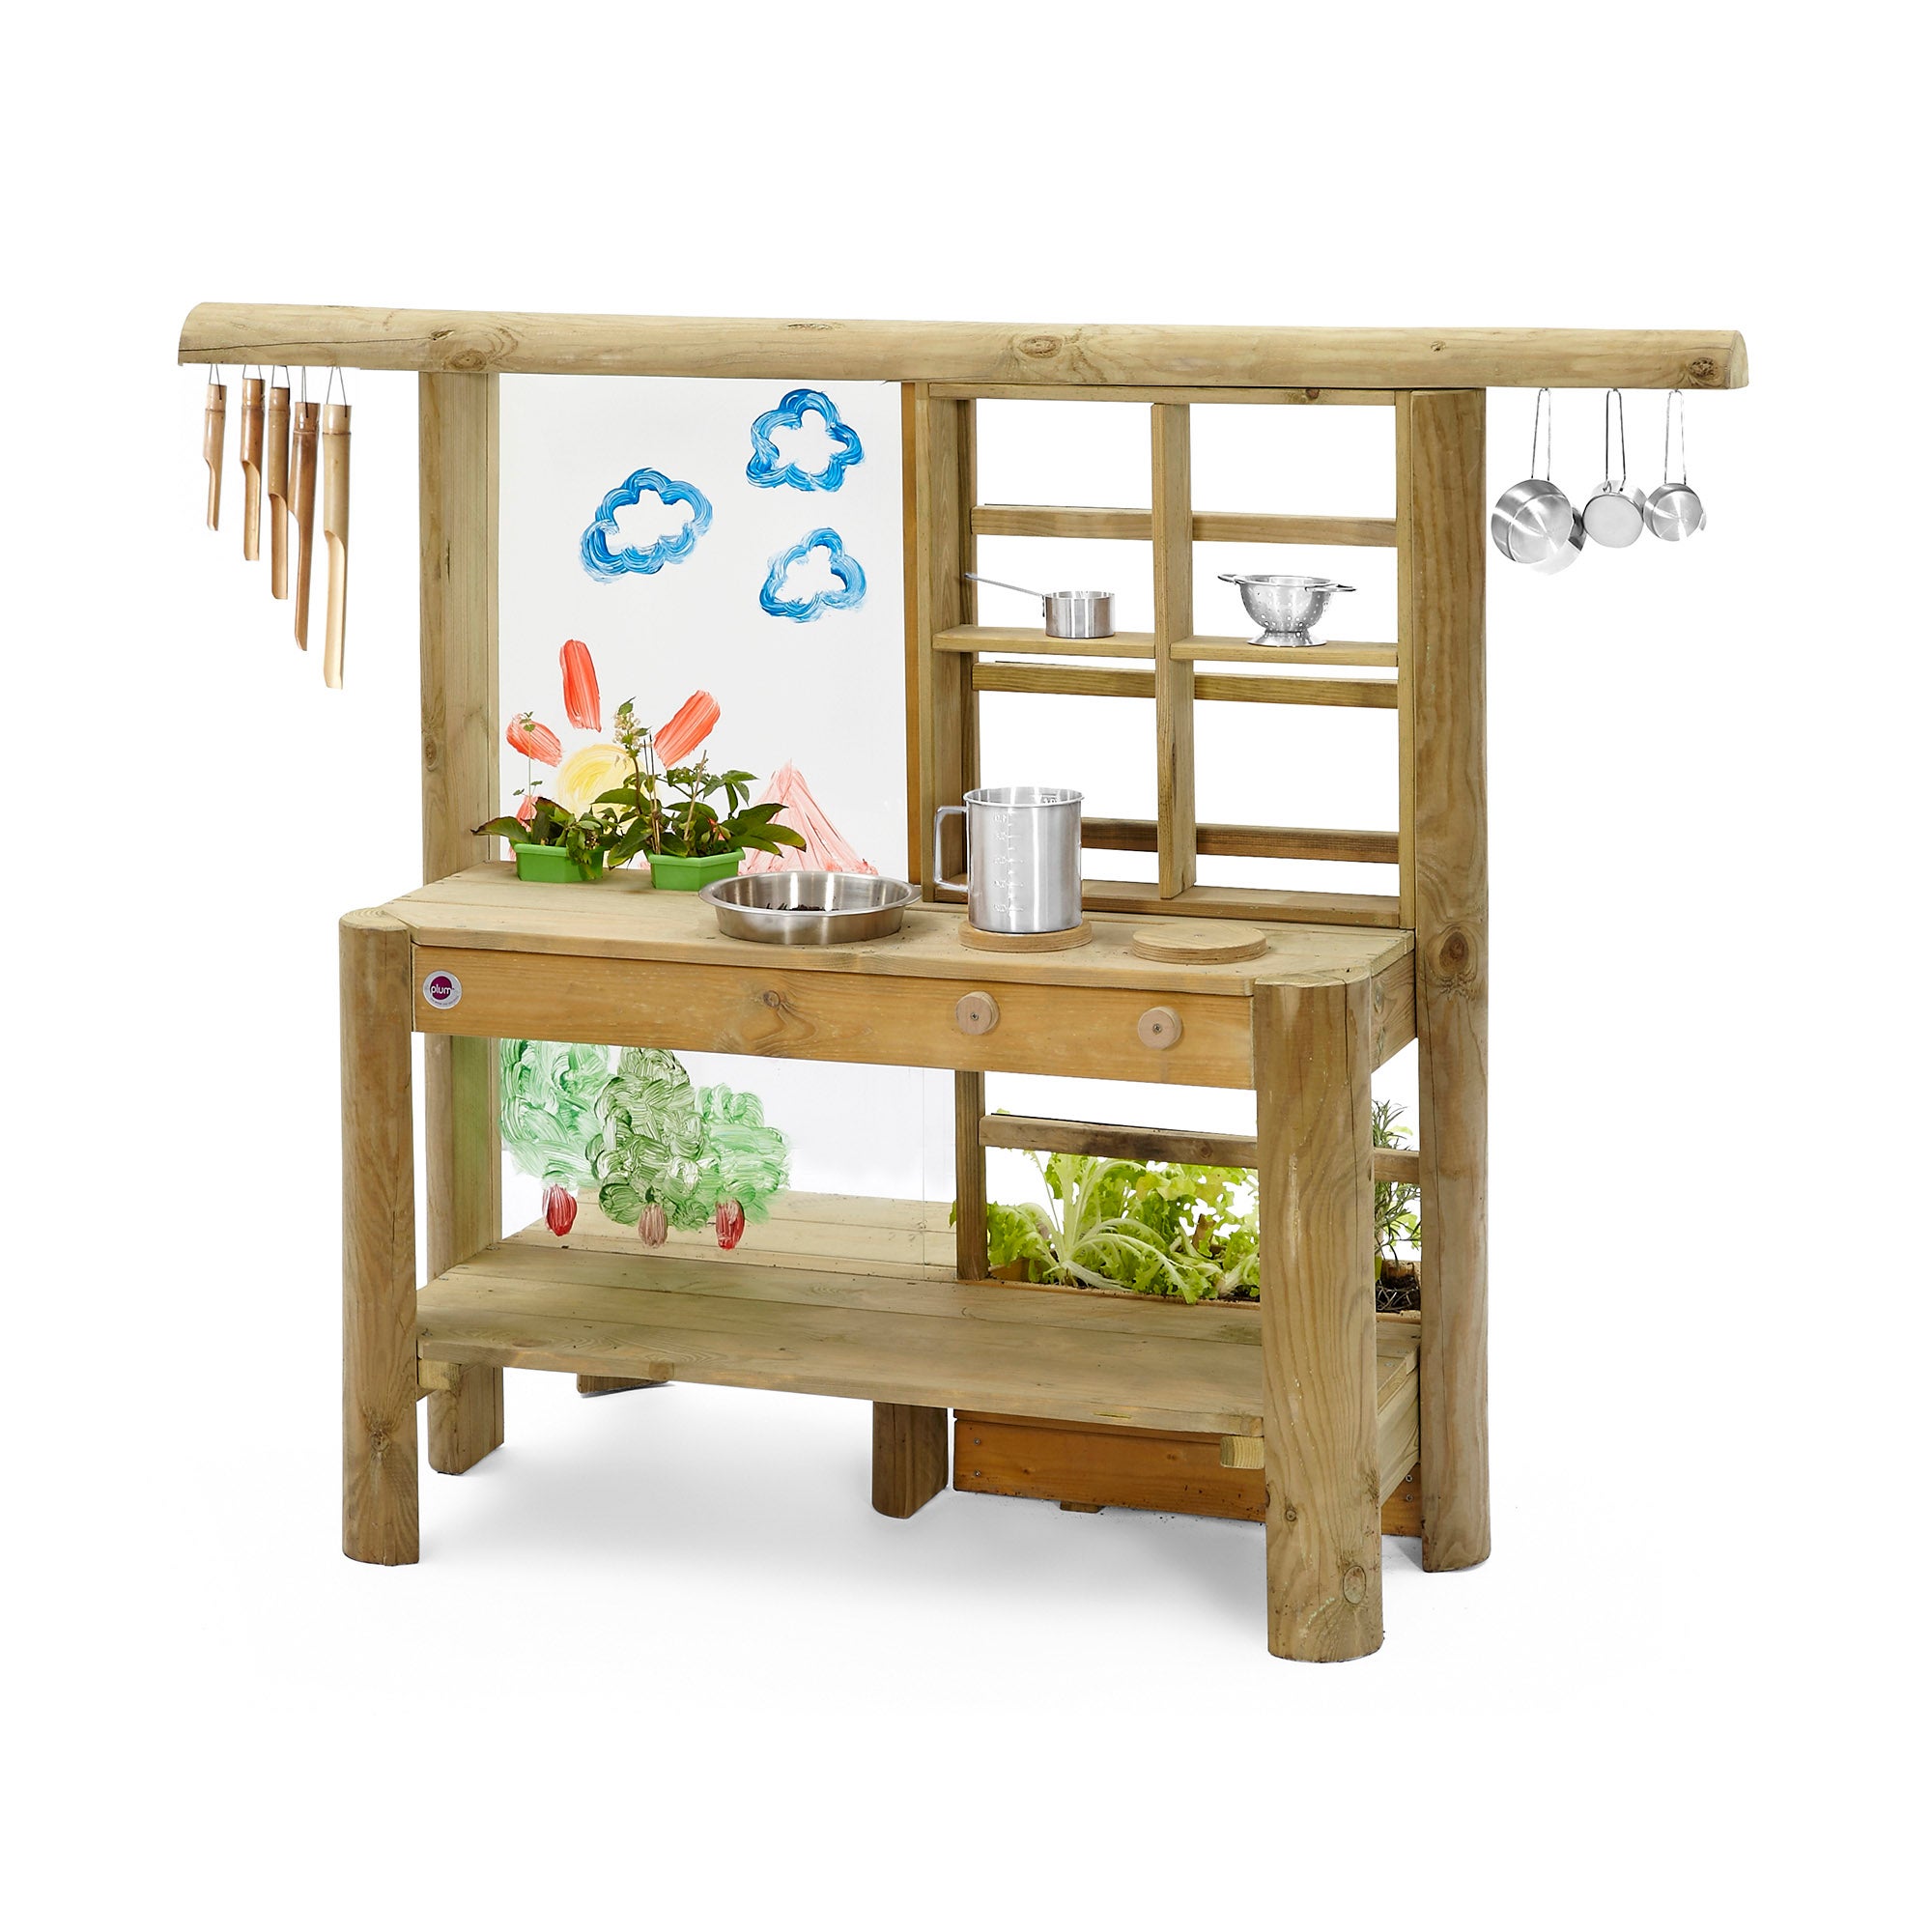 Plum Play Play Kids Wooden Mudpie Kitchen with Screen & Planter